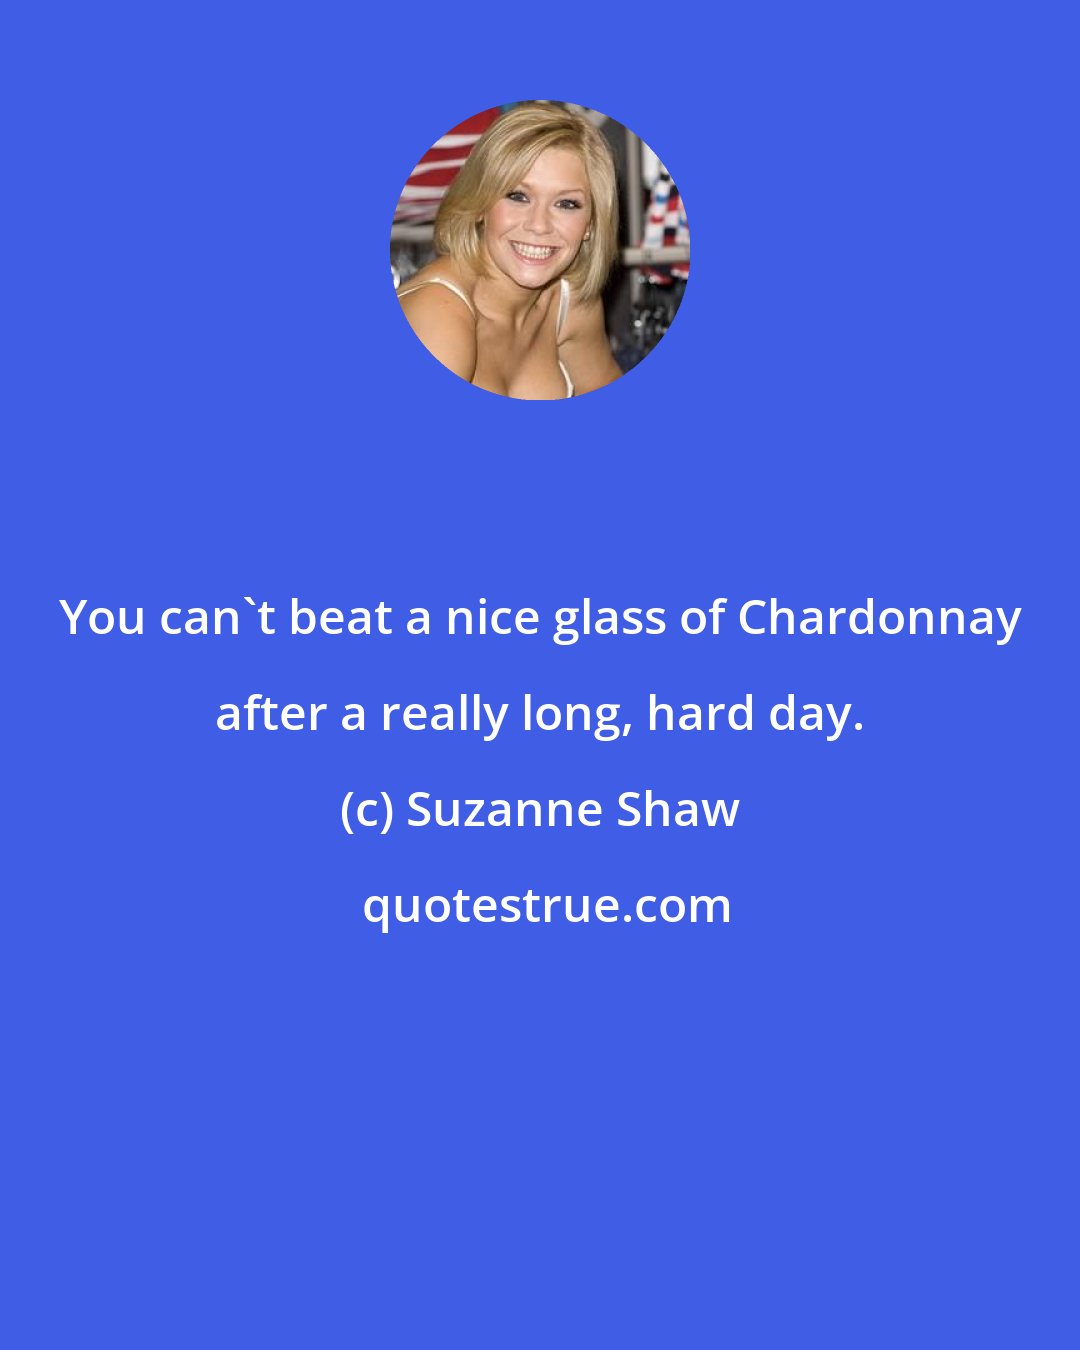 Suzanne Shaw: You can't beat a nice glass of Chardonnay after a really long, hard day.